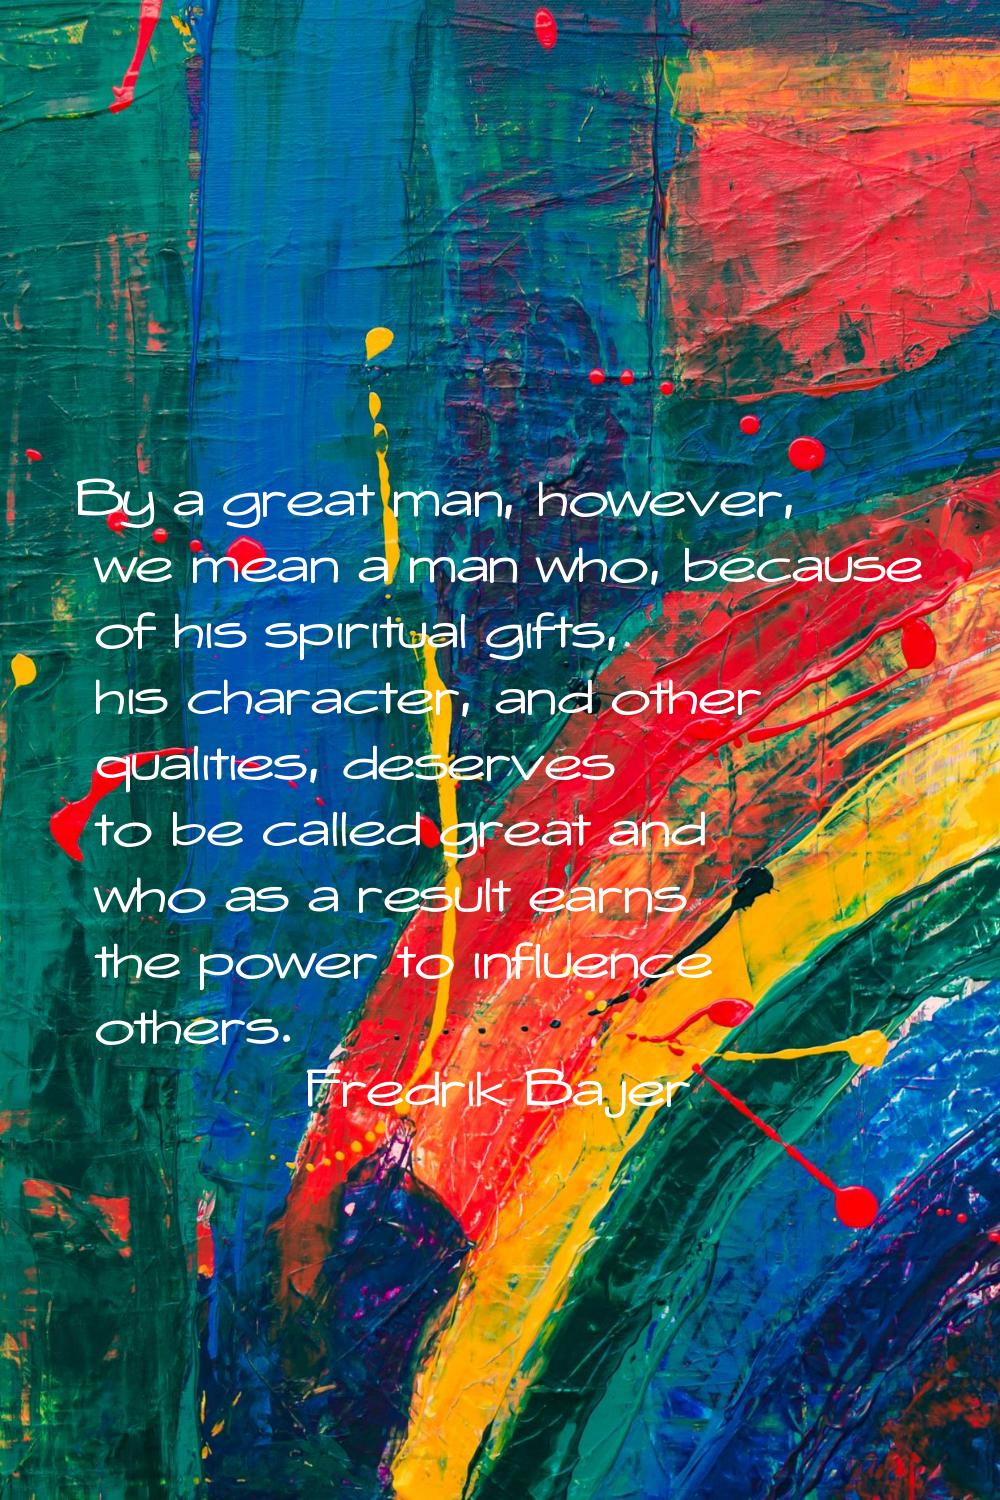 By a great man, however, we mean a man who, because of his spiritual gifts, his character, and othe